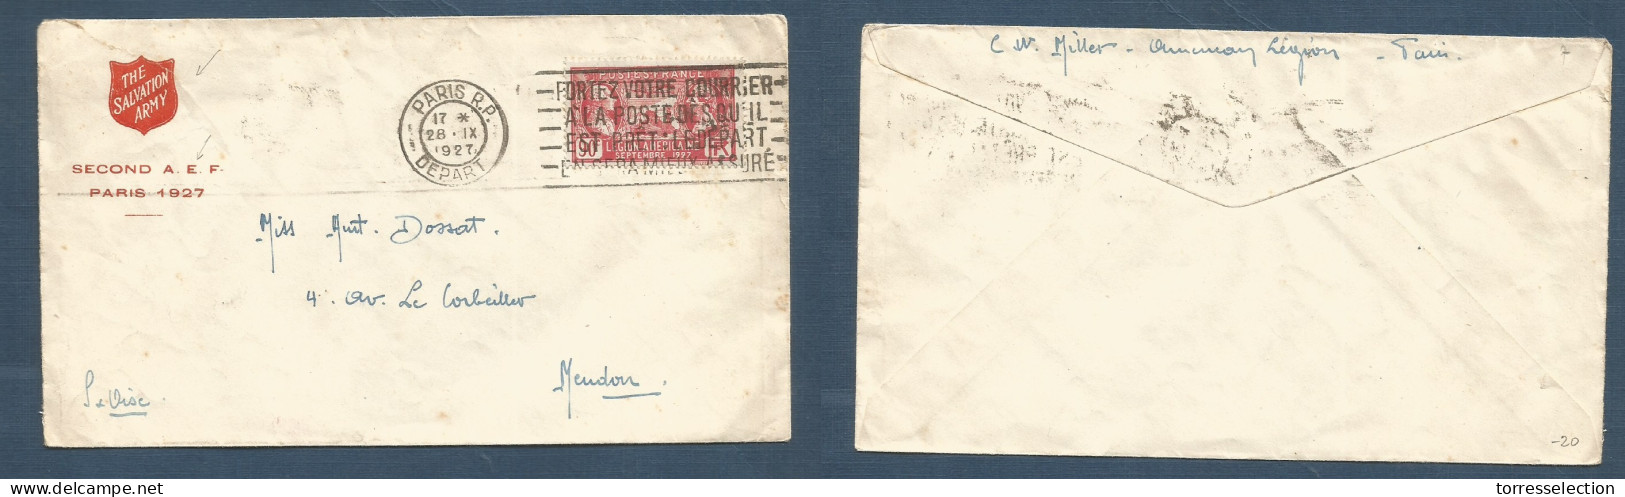 MILITARY MAIL. 1927 (28 Sept) USA, American Forces- Second AEF. Salvation Army Fkd Envelope. America Legion. Local Fkd U - Military Mail (PM)